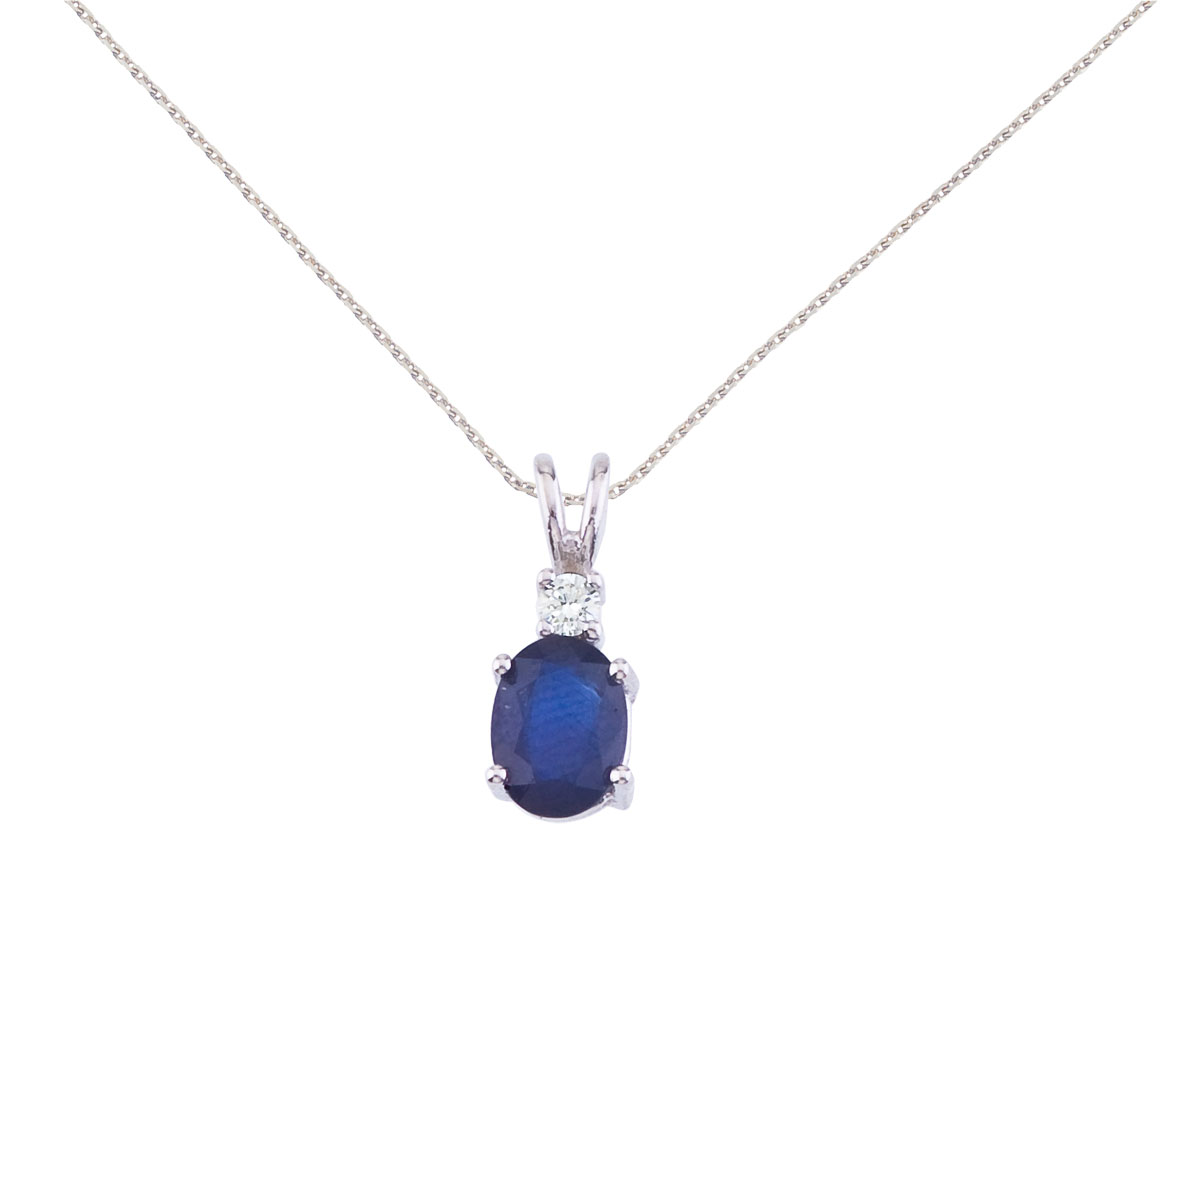 7x5 mm natural sapphire and diamond pendant set in 14k white gold.